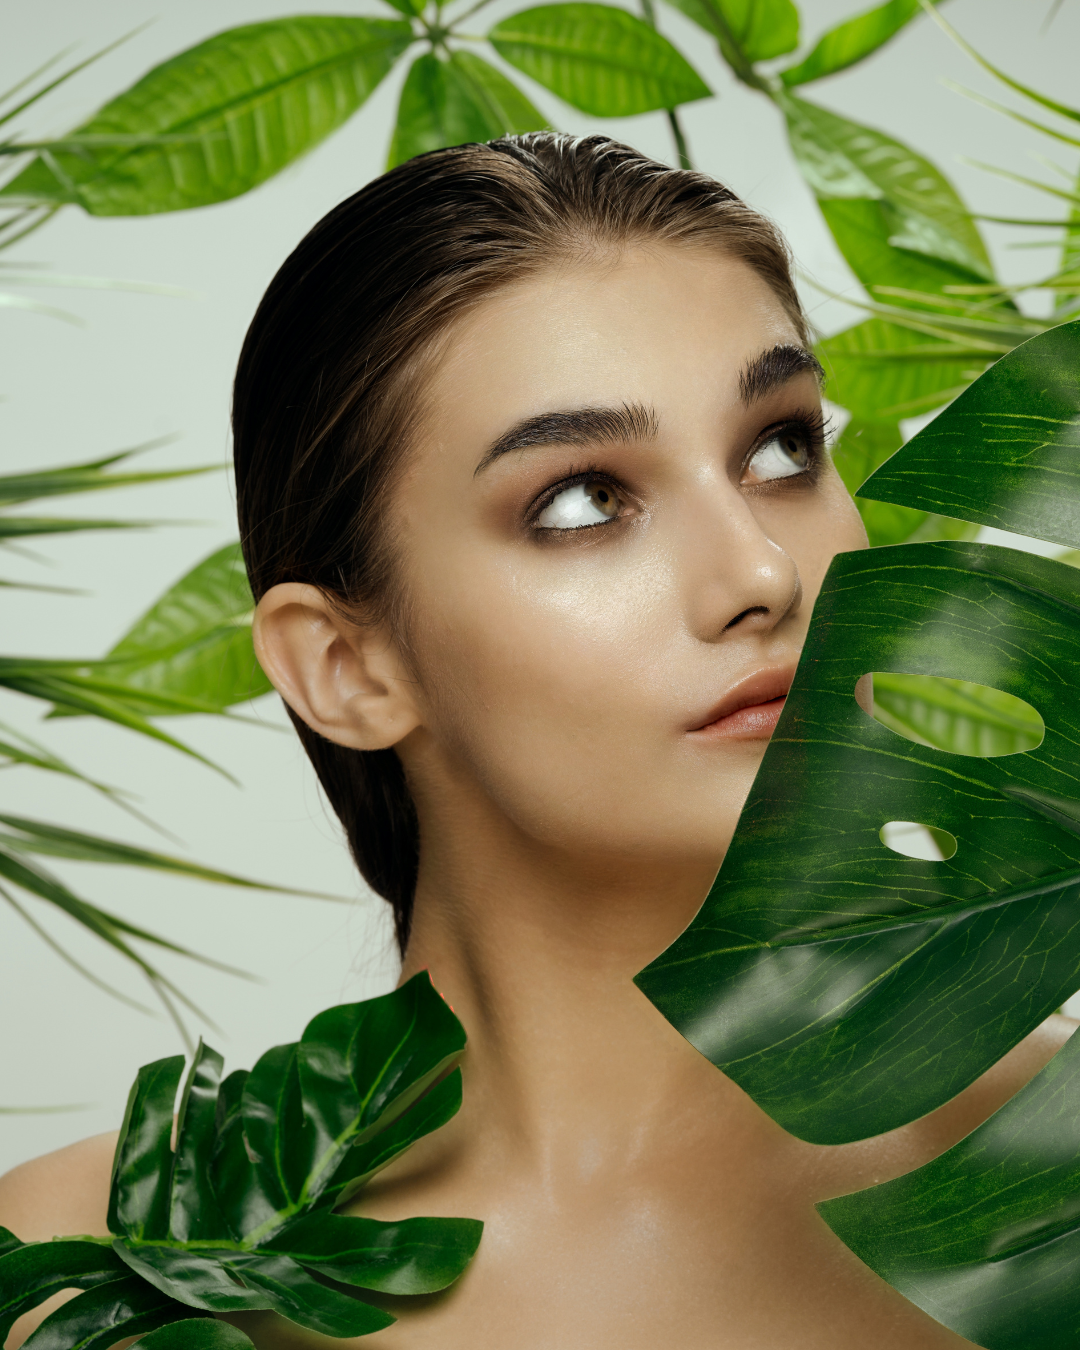 Ethical Considerations in Skincare: What You Should Know Before You Buy